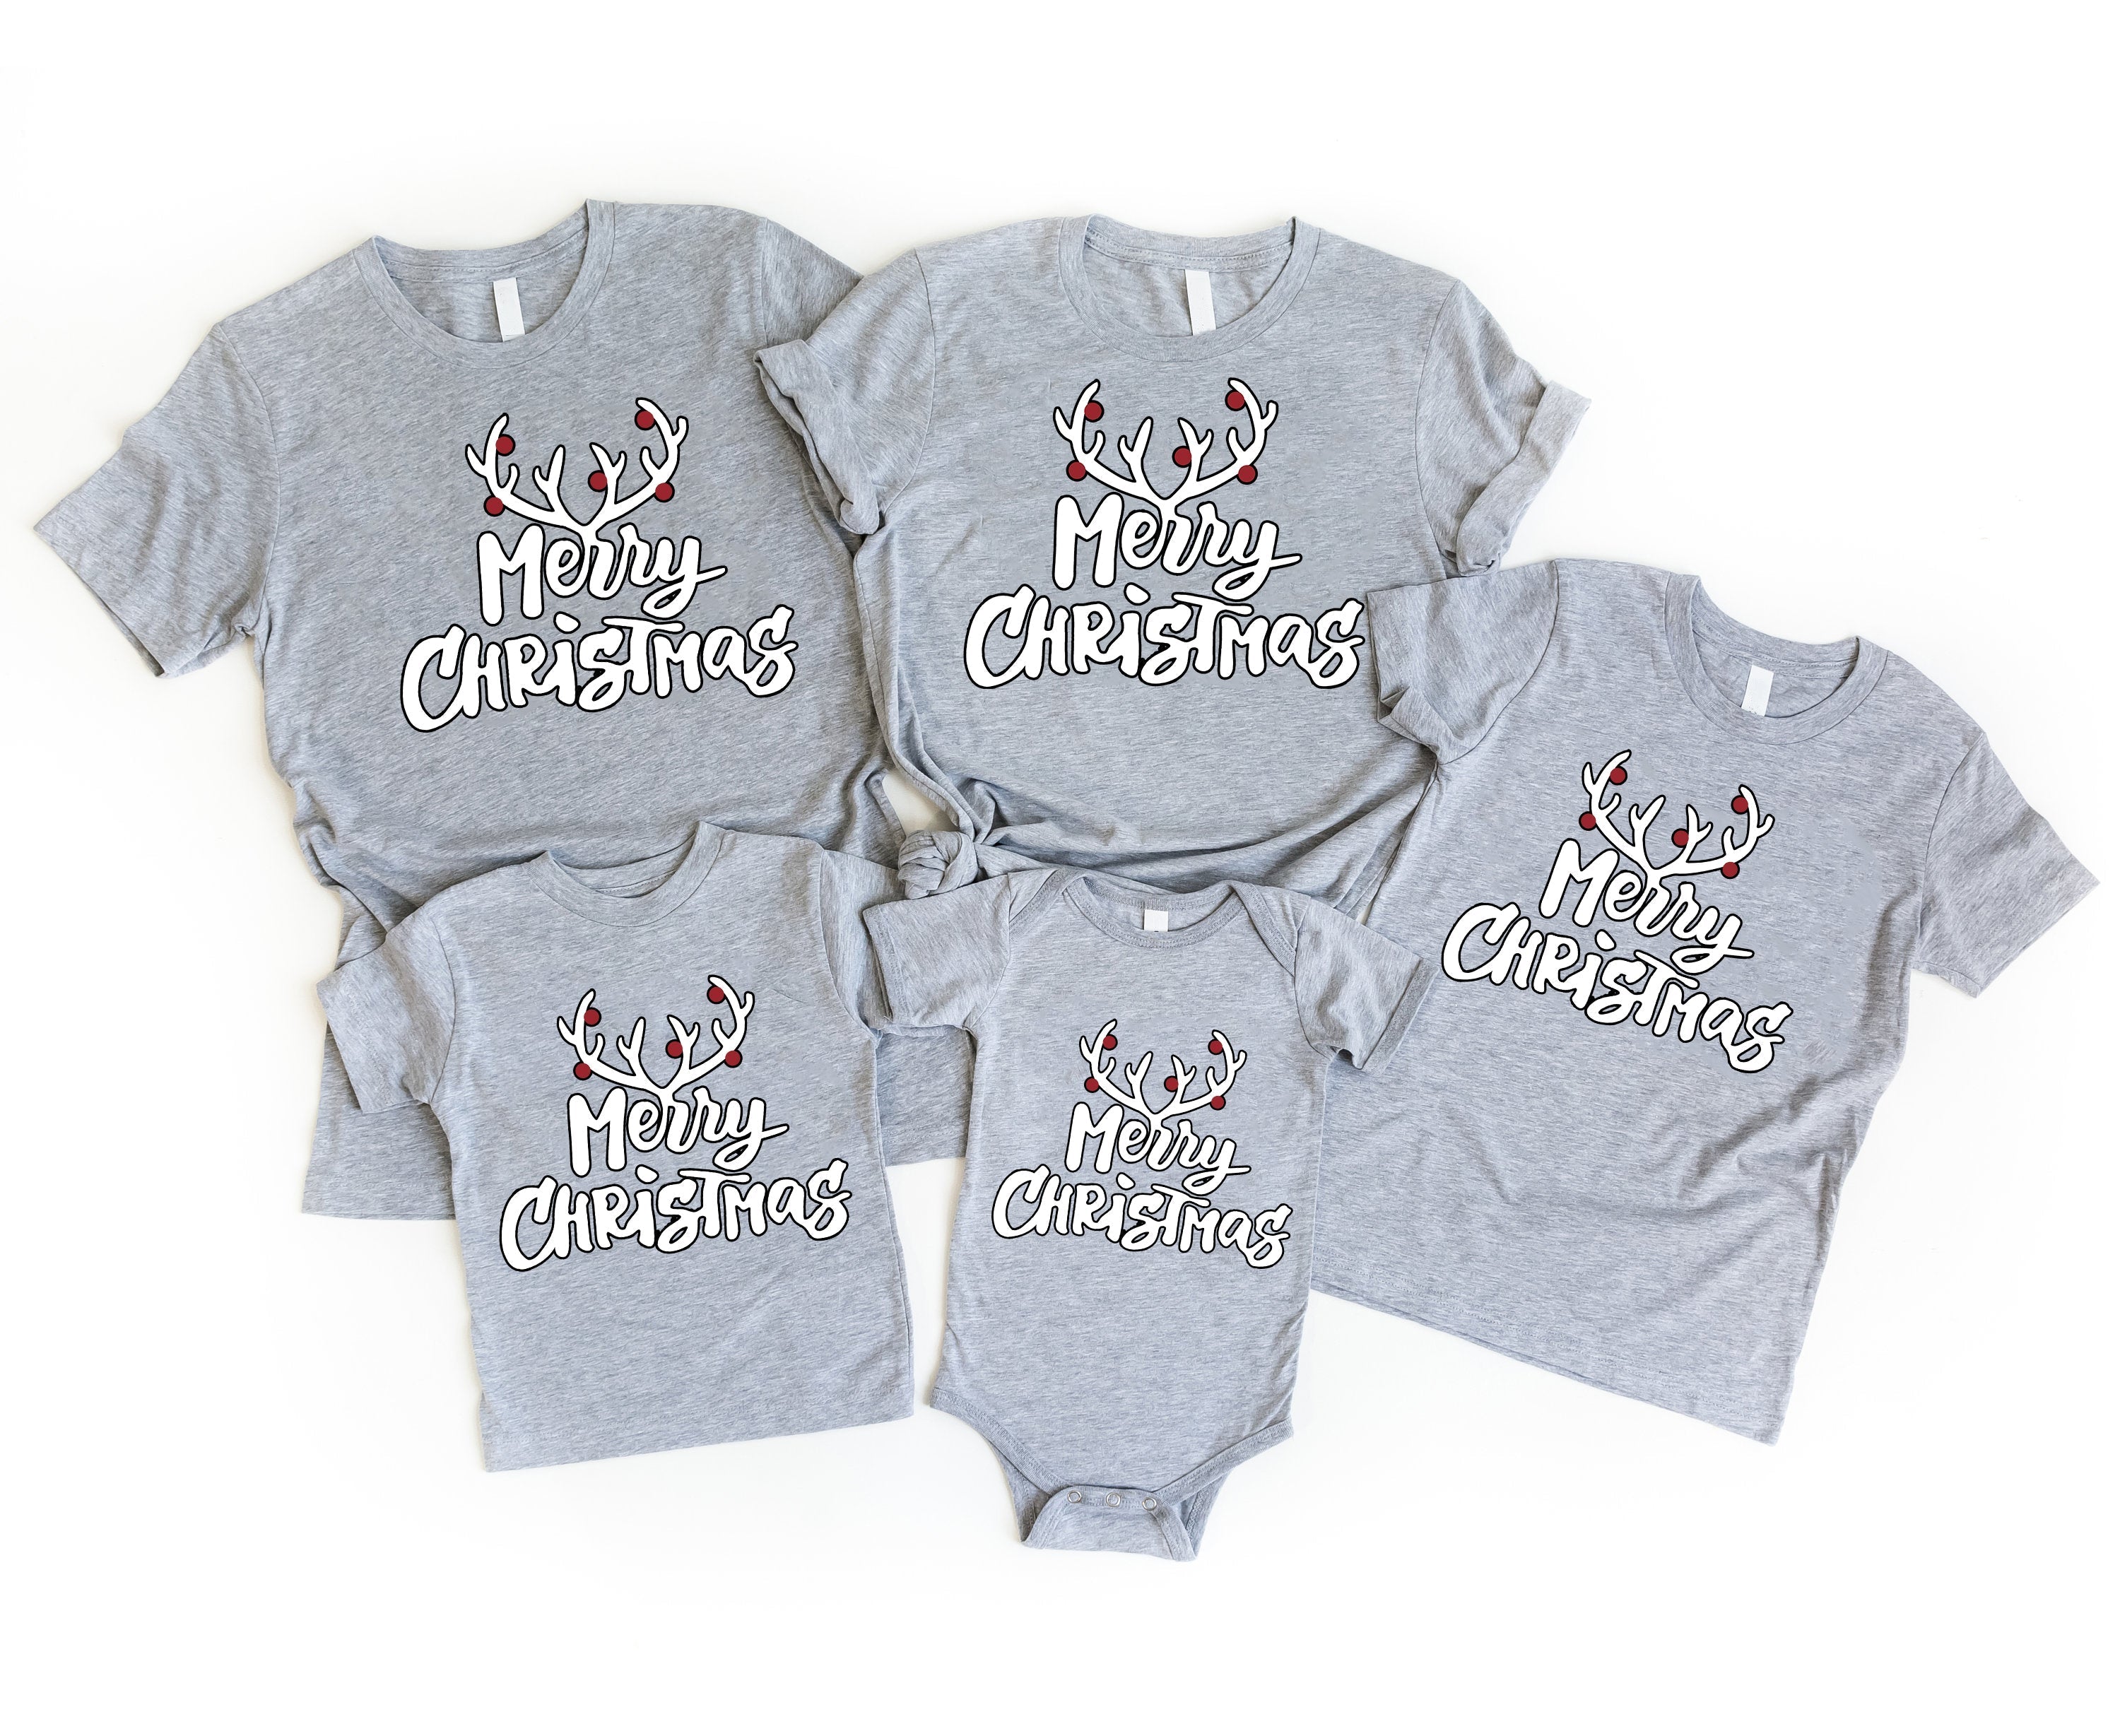 Christmas Reindeer Antlers 'Merry Chirstmas' Pattern Family Christmas Matching Pajamas Tops Cute Gray Short Sleeve T-shirts With Dog Bandana